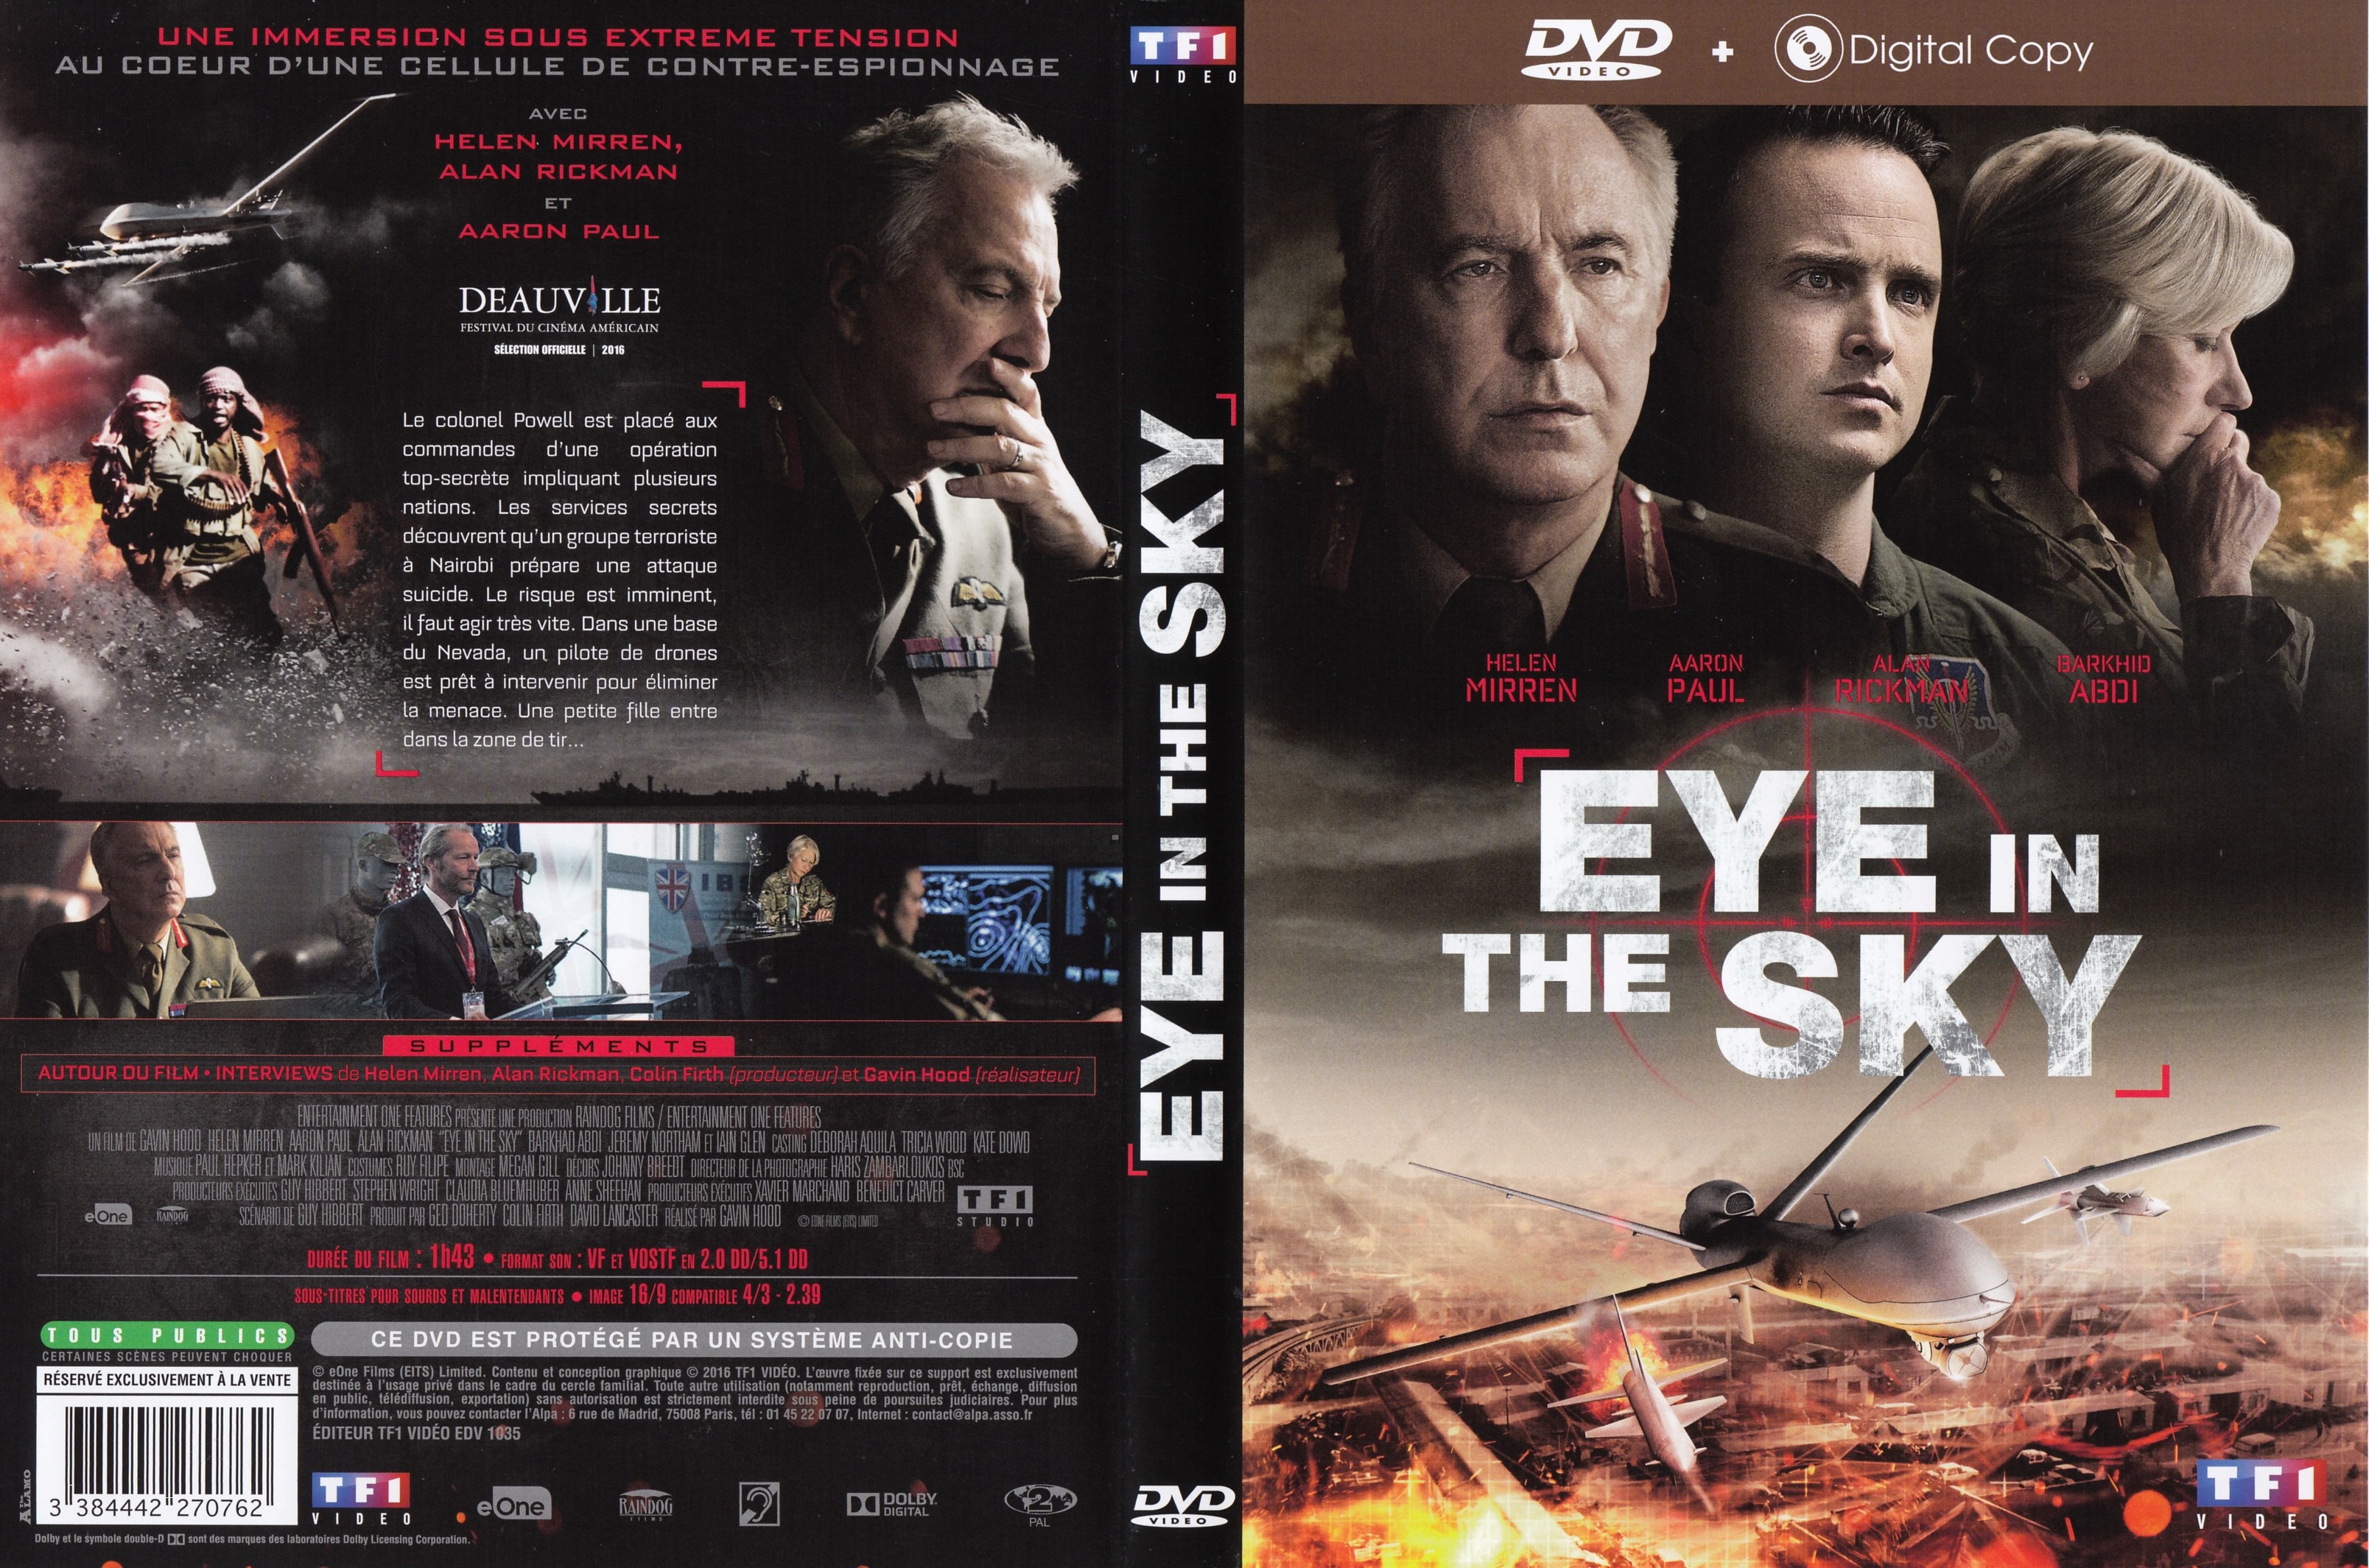 Jaquette DVD Eye in the Sky